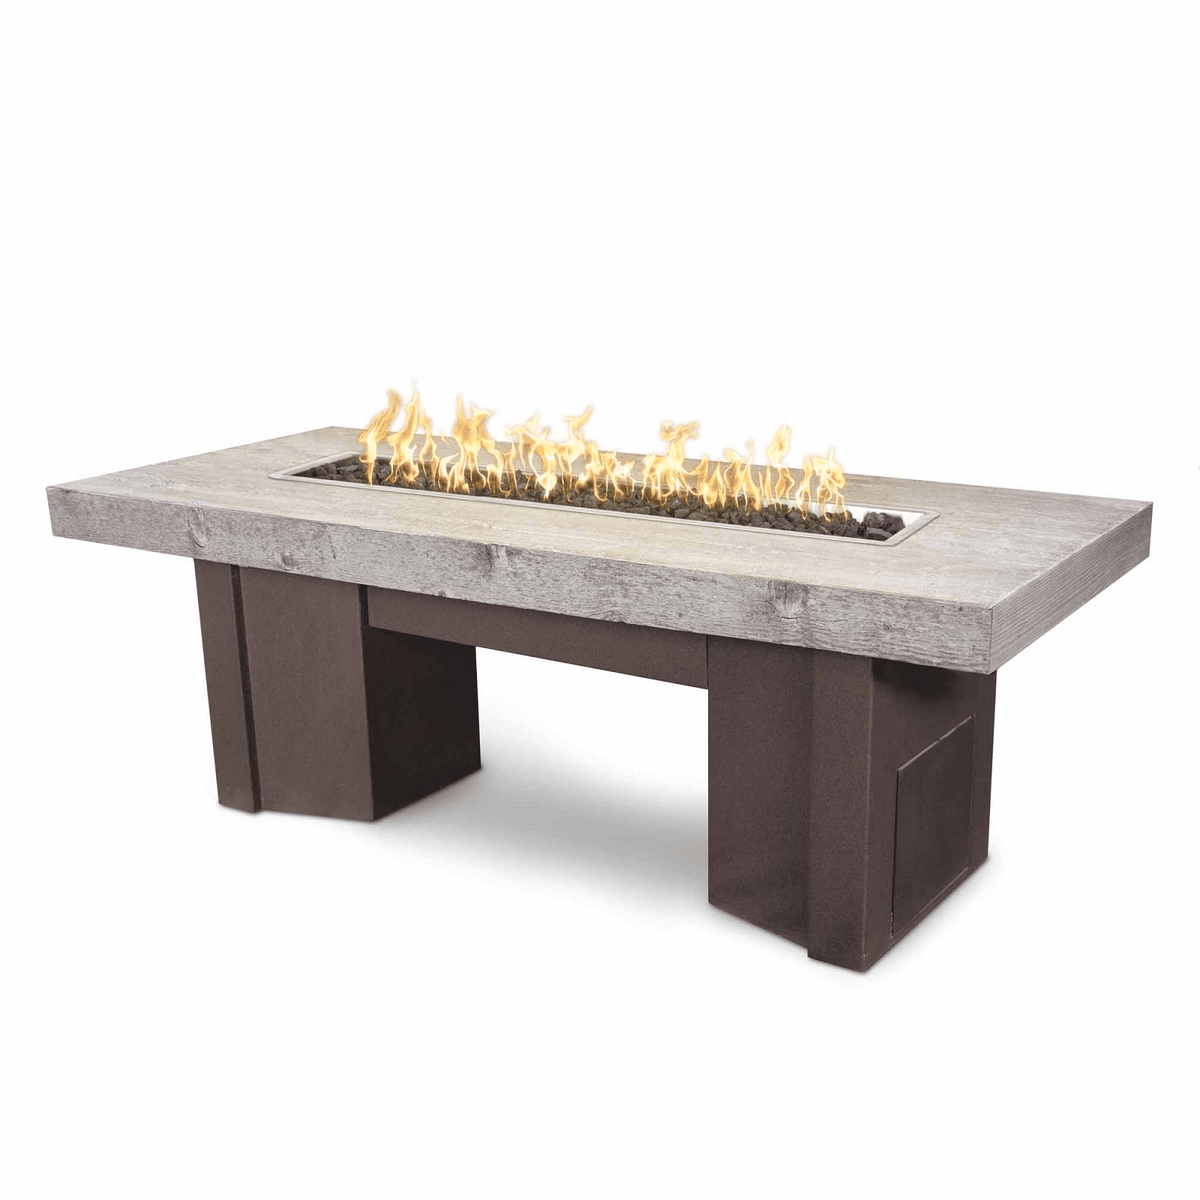 The Outdoor Plus Fire Features The Outdoor Plus 60&quot; Alameda Fire Table Wood Grain - 12V Electronic Ignition / OPT-ALMWG60E12V